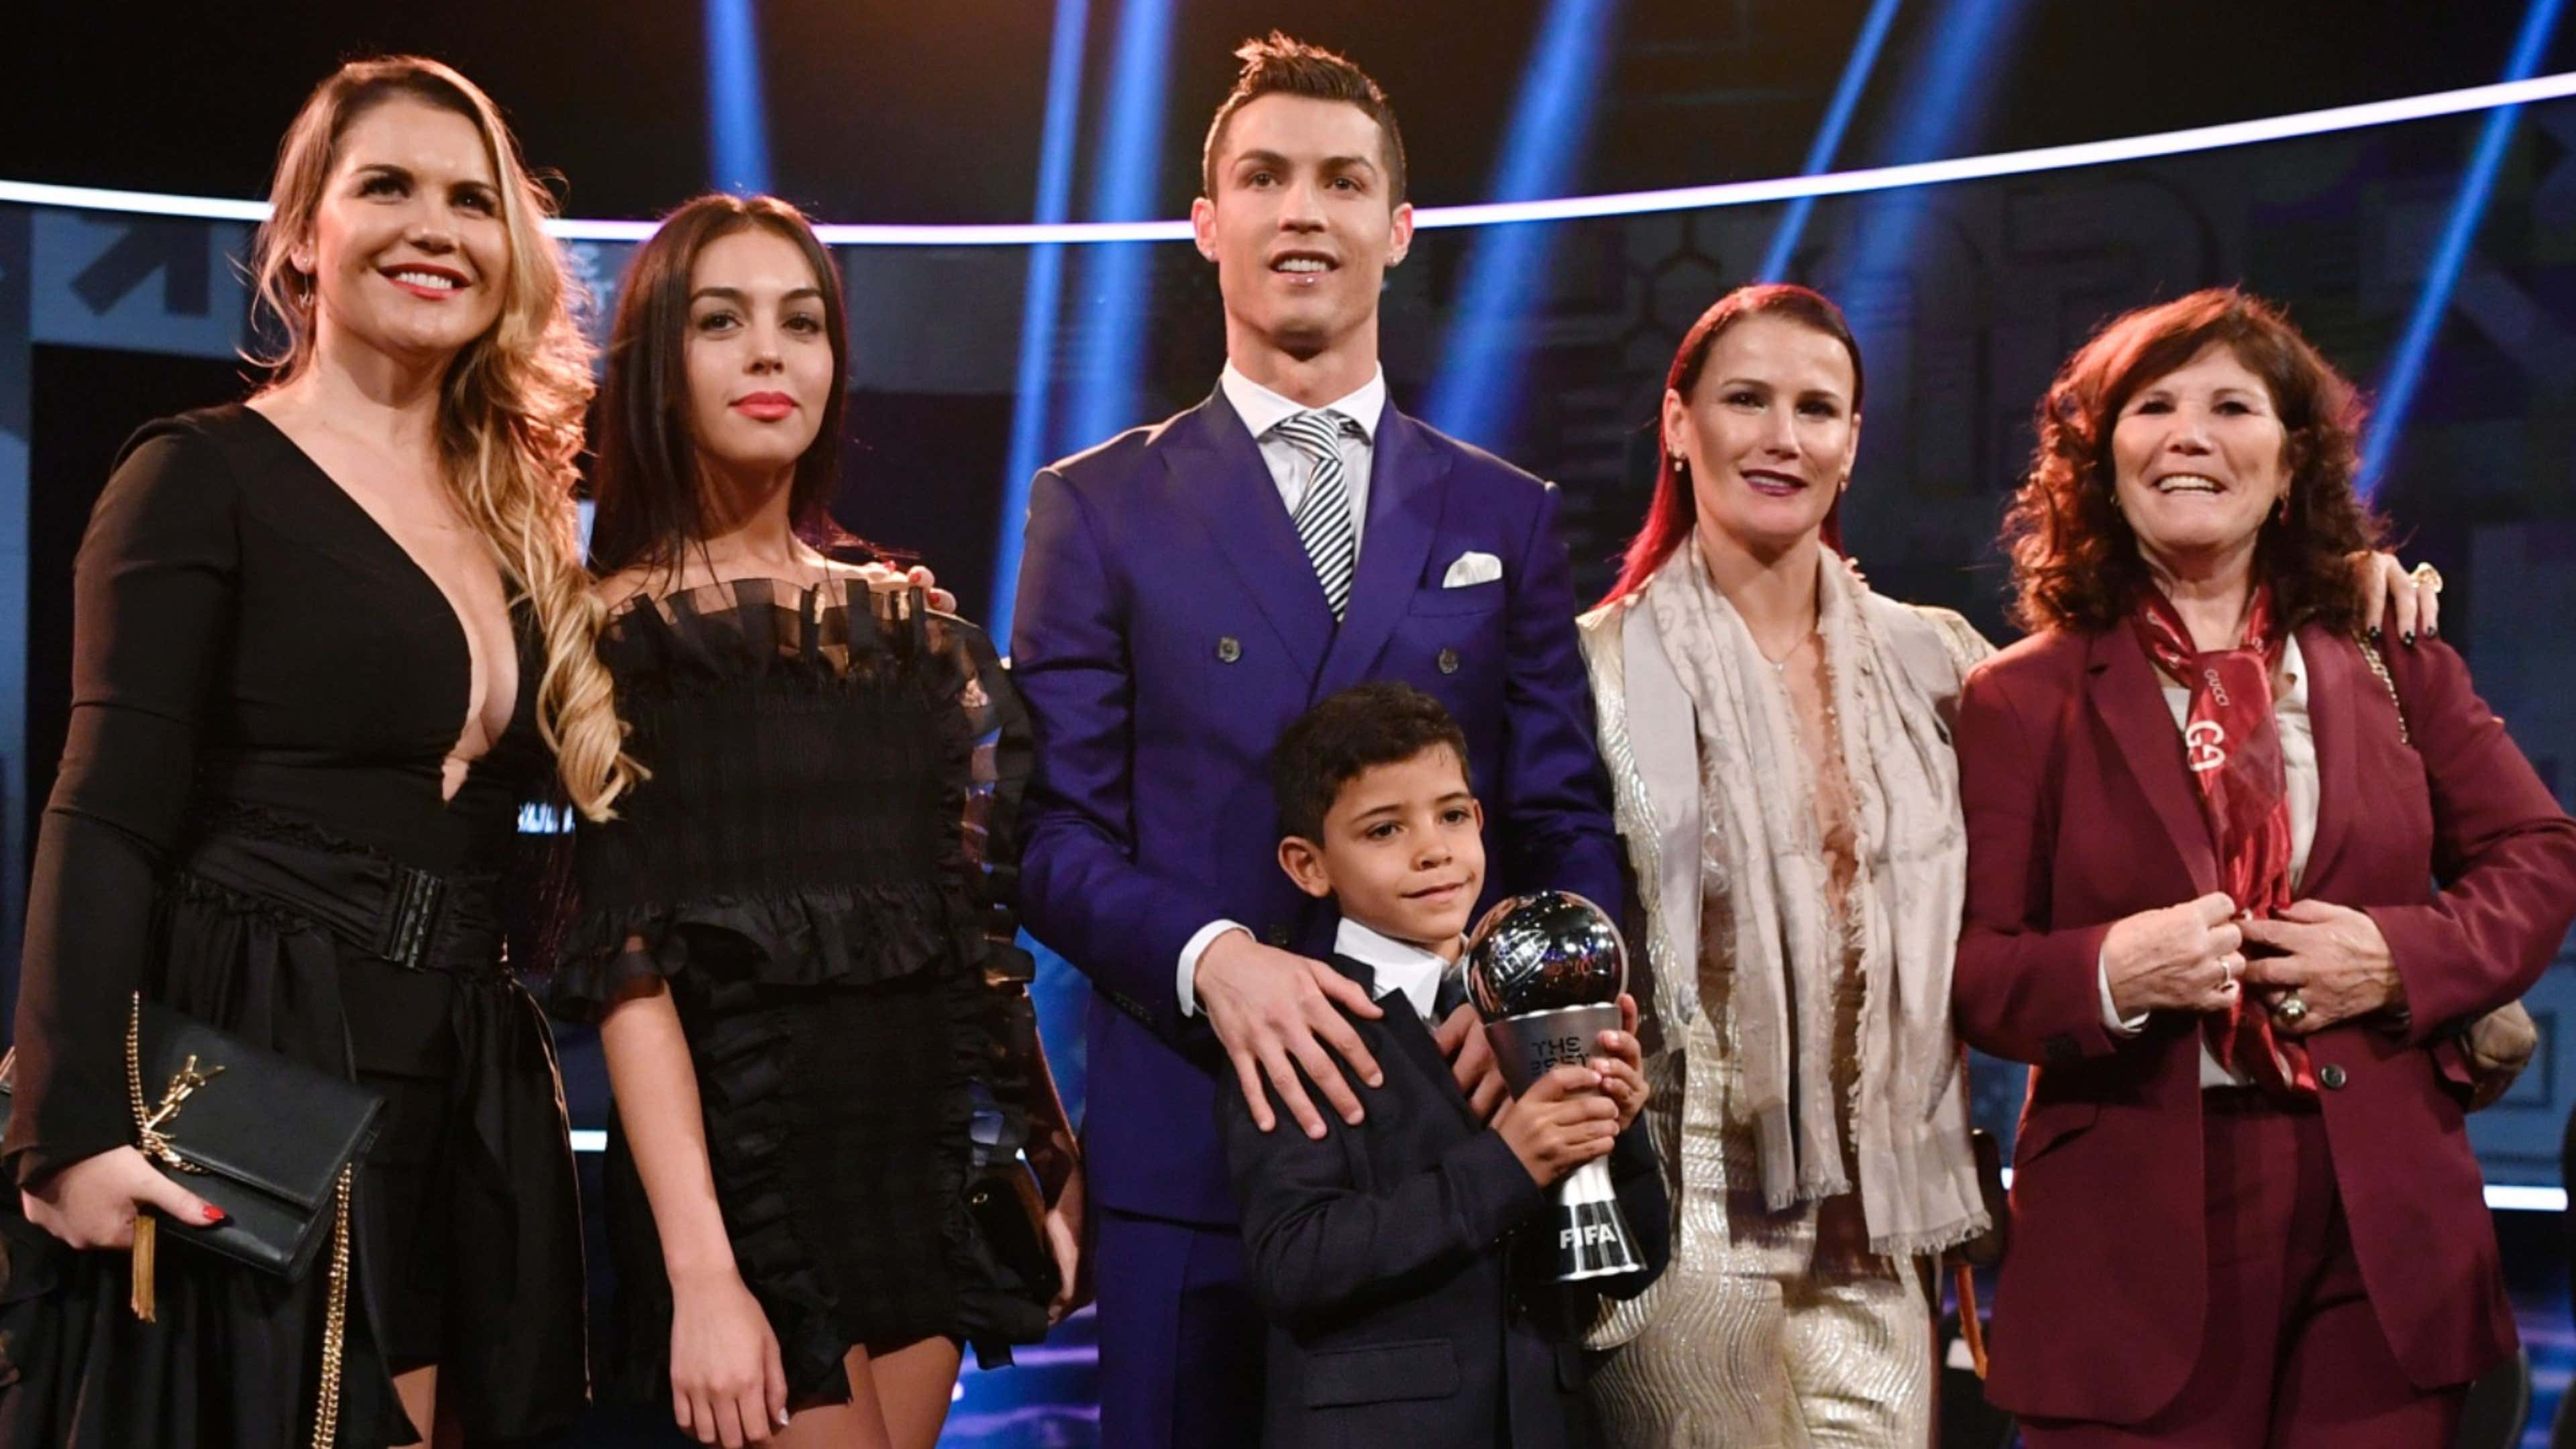 Cristiano Ronaldo: How many children does he have & what are their names?